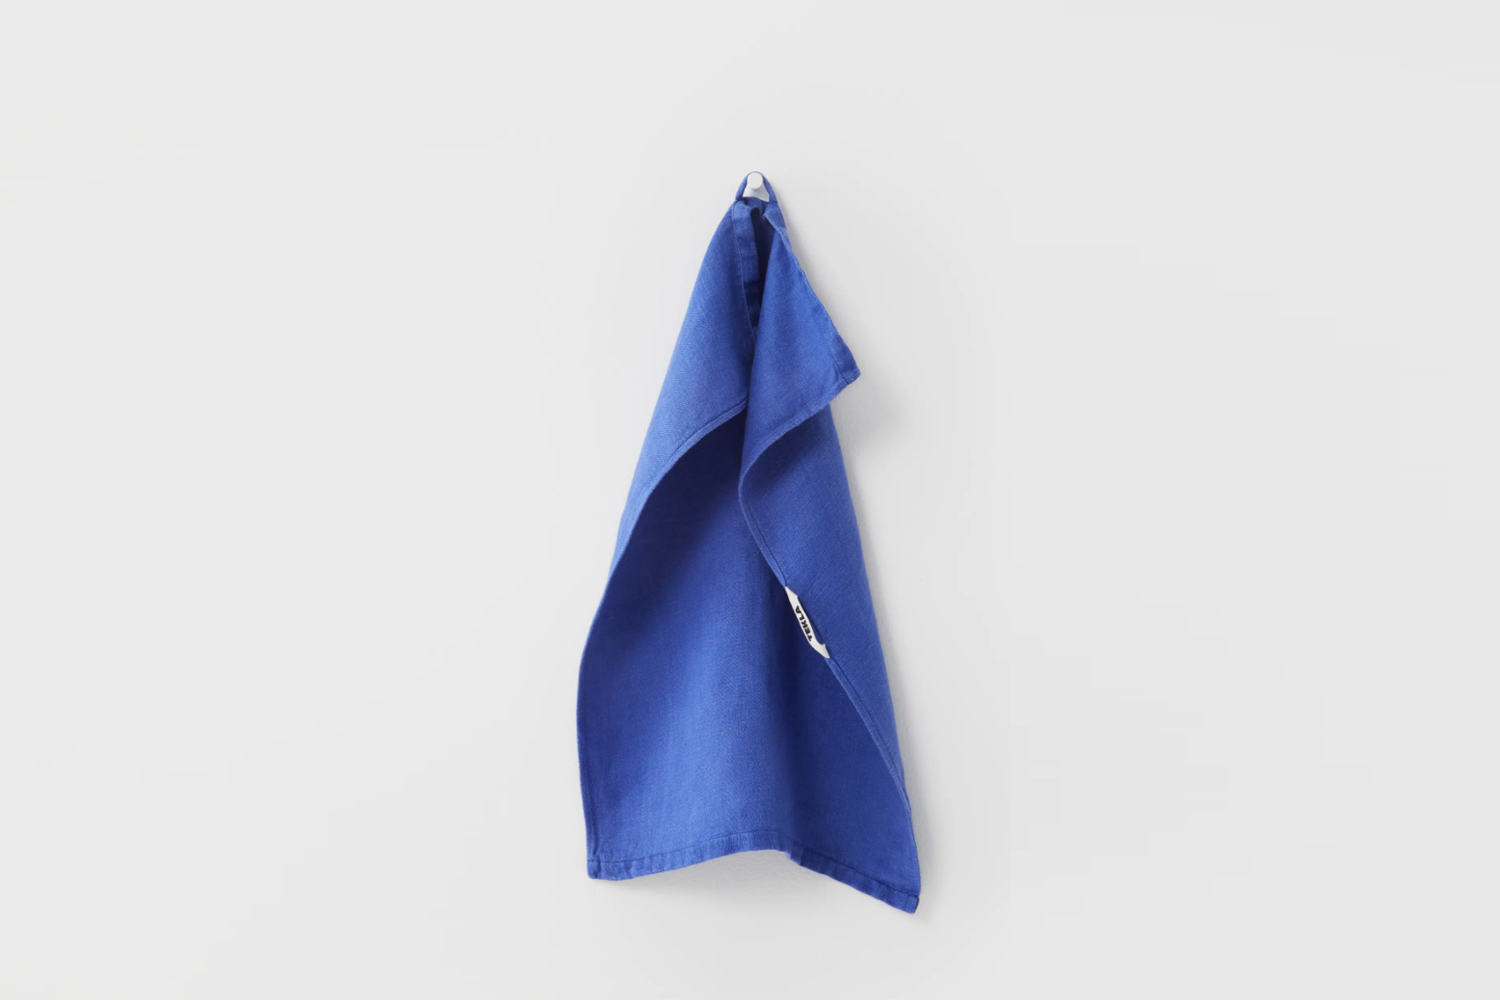 the linen tekla kitchen towel in stain, a deep blue color, is $45. 23